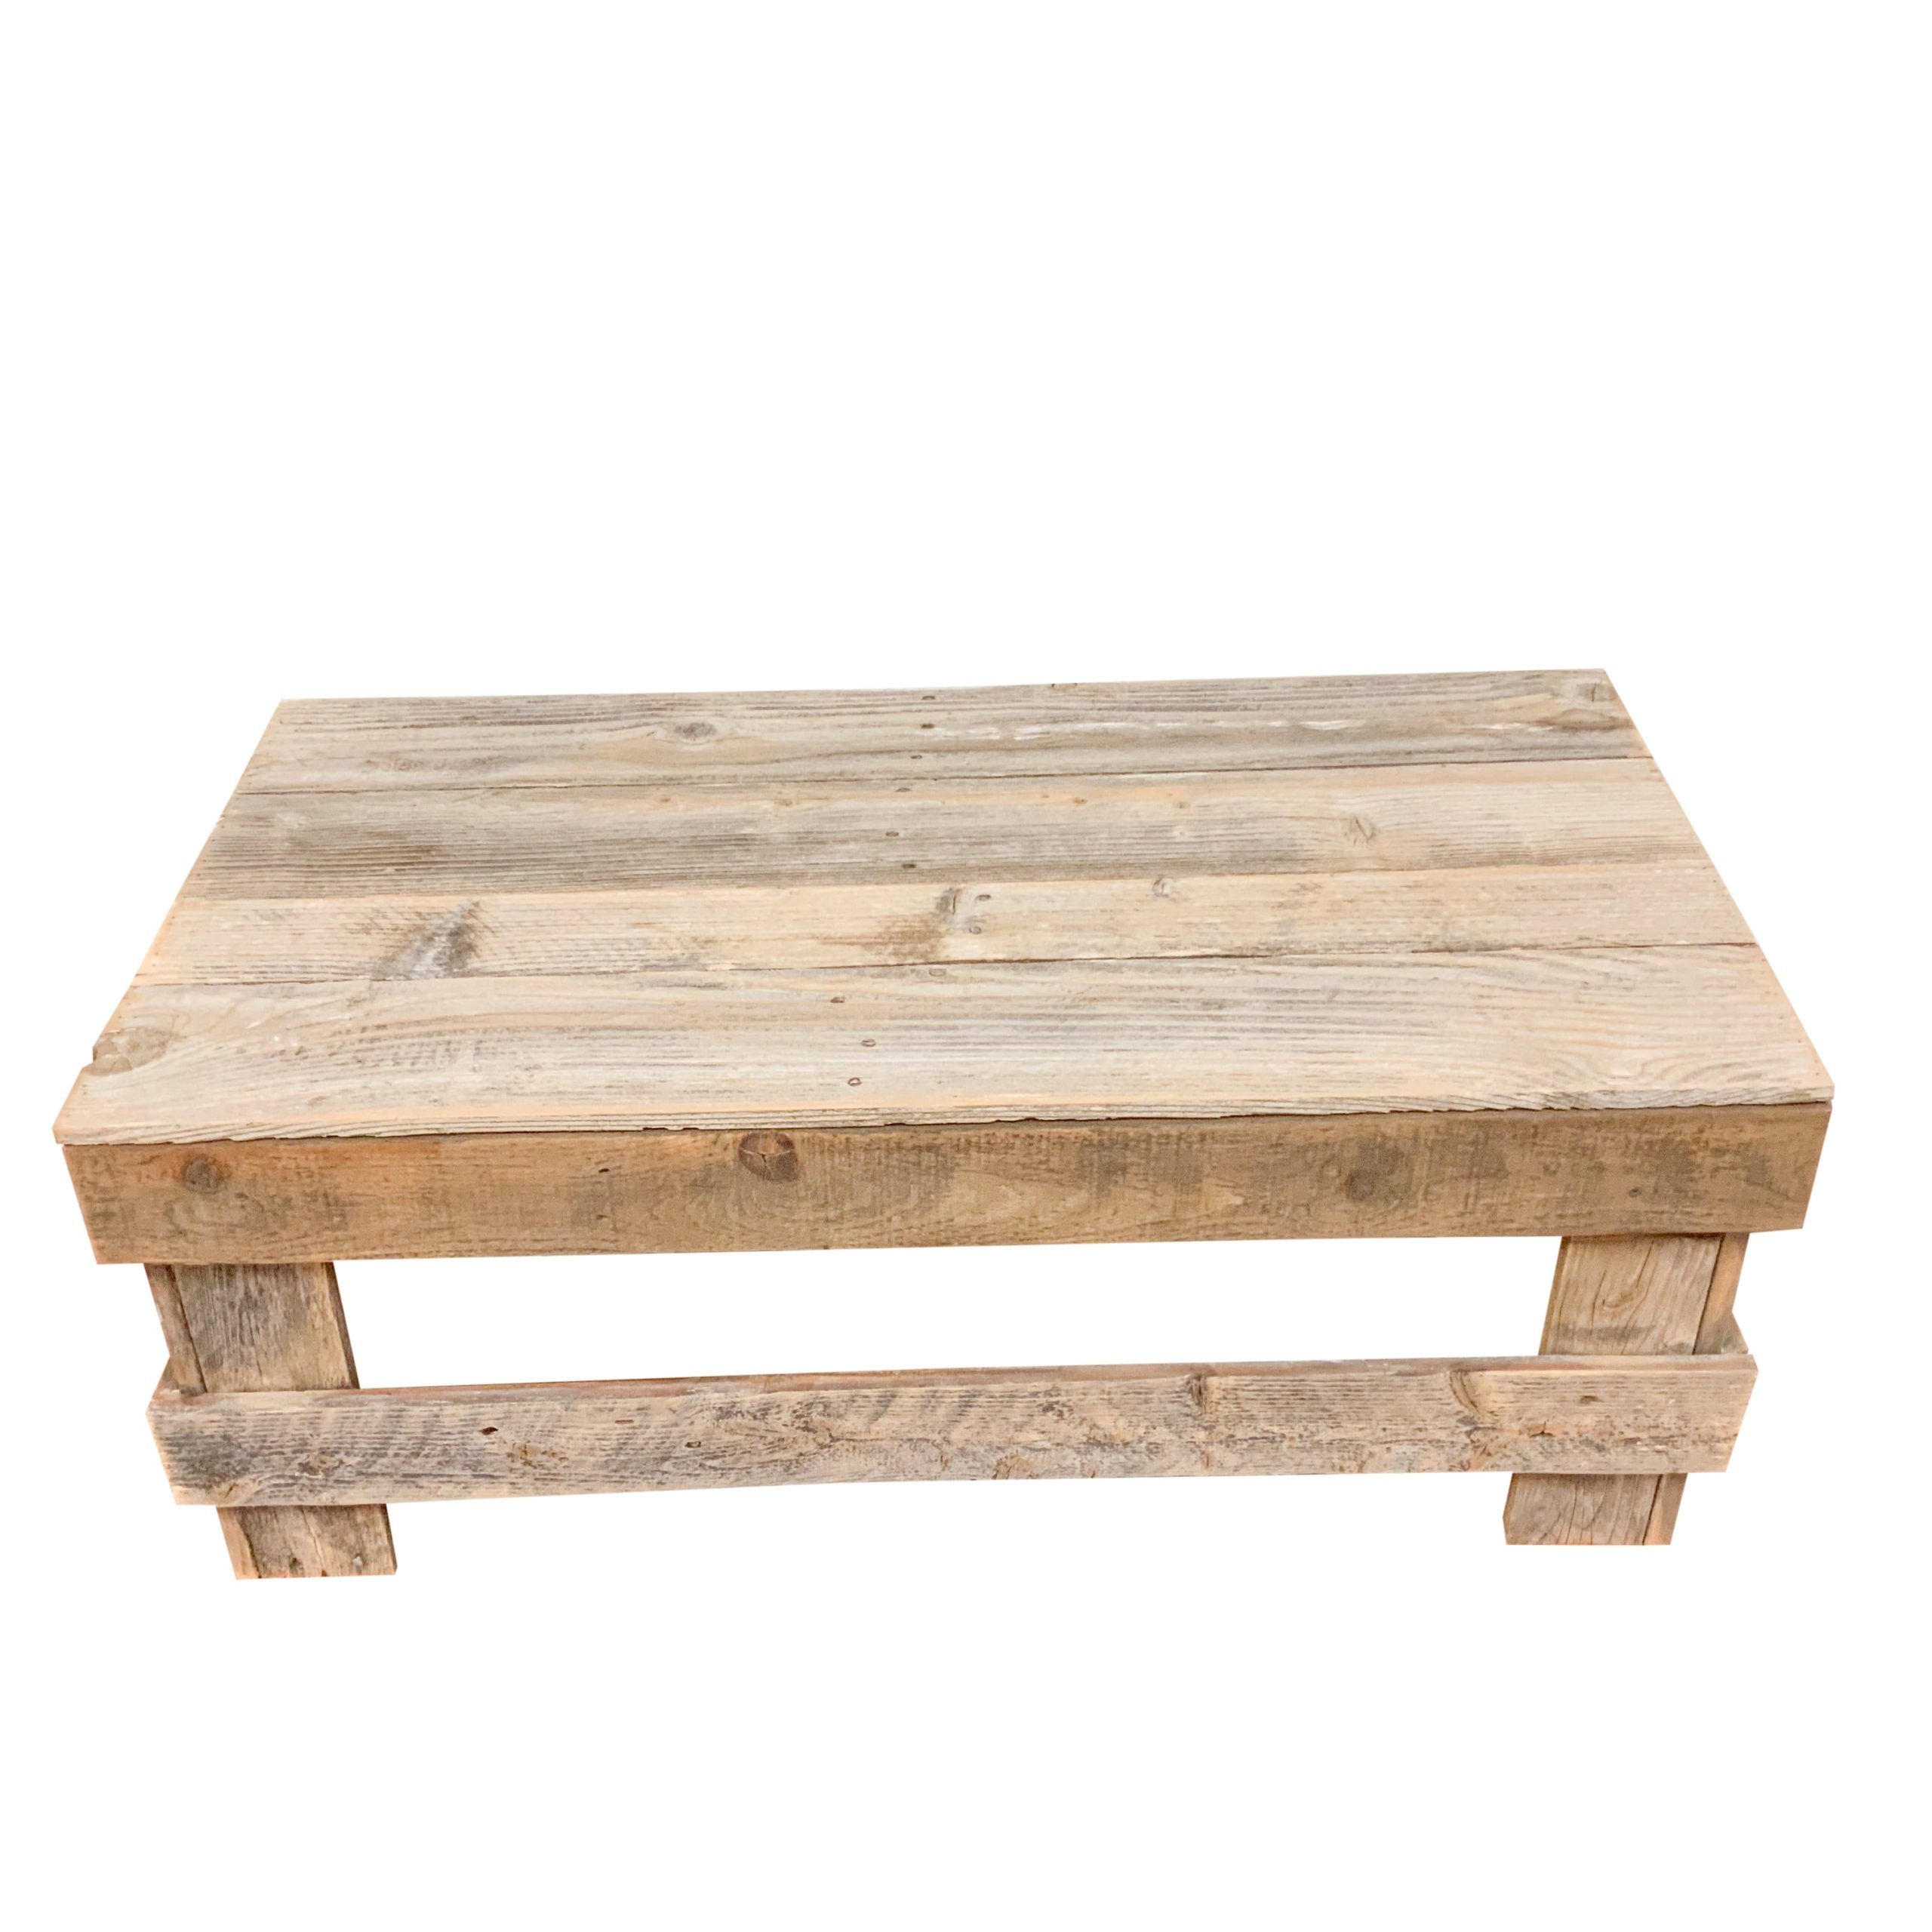 Woven Paths Reclaimed Wood Coffee Table, Natural – Walmart With Regard To Woven Paths Coffee Tables (Photo 12 of 15)